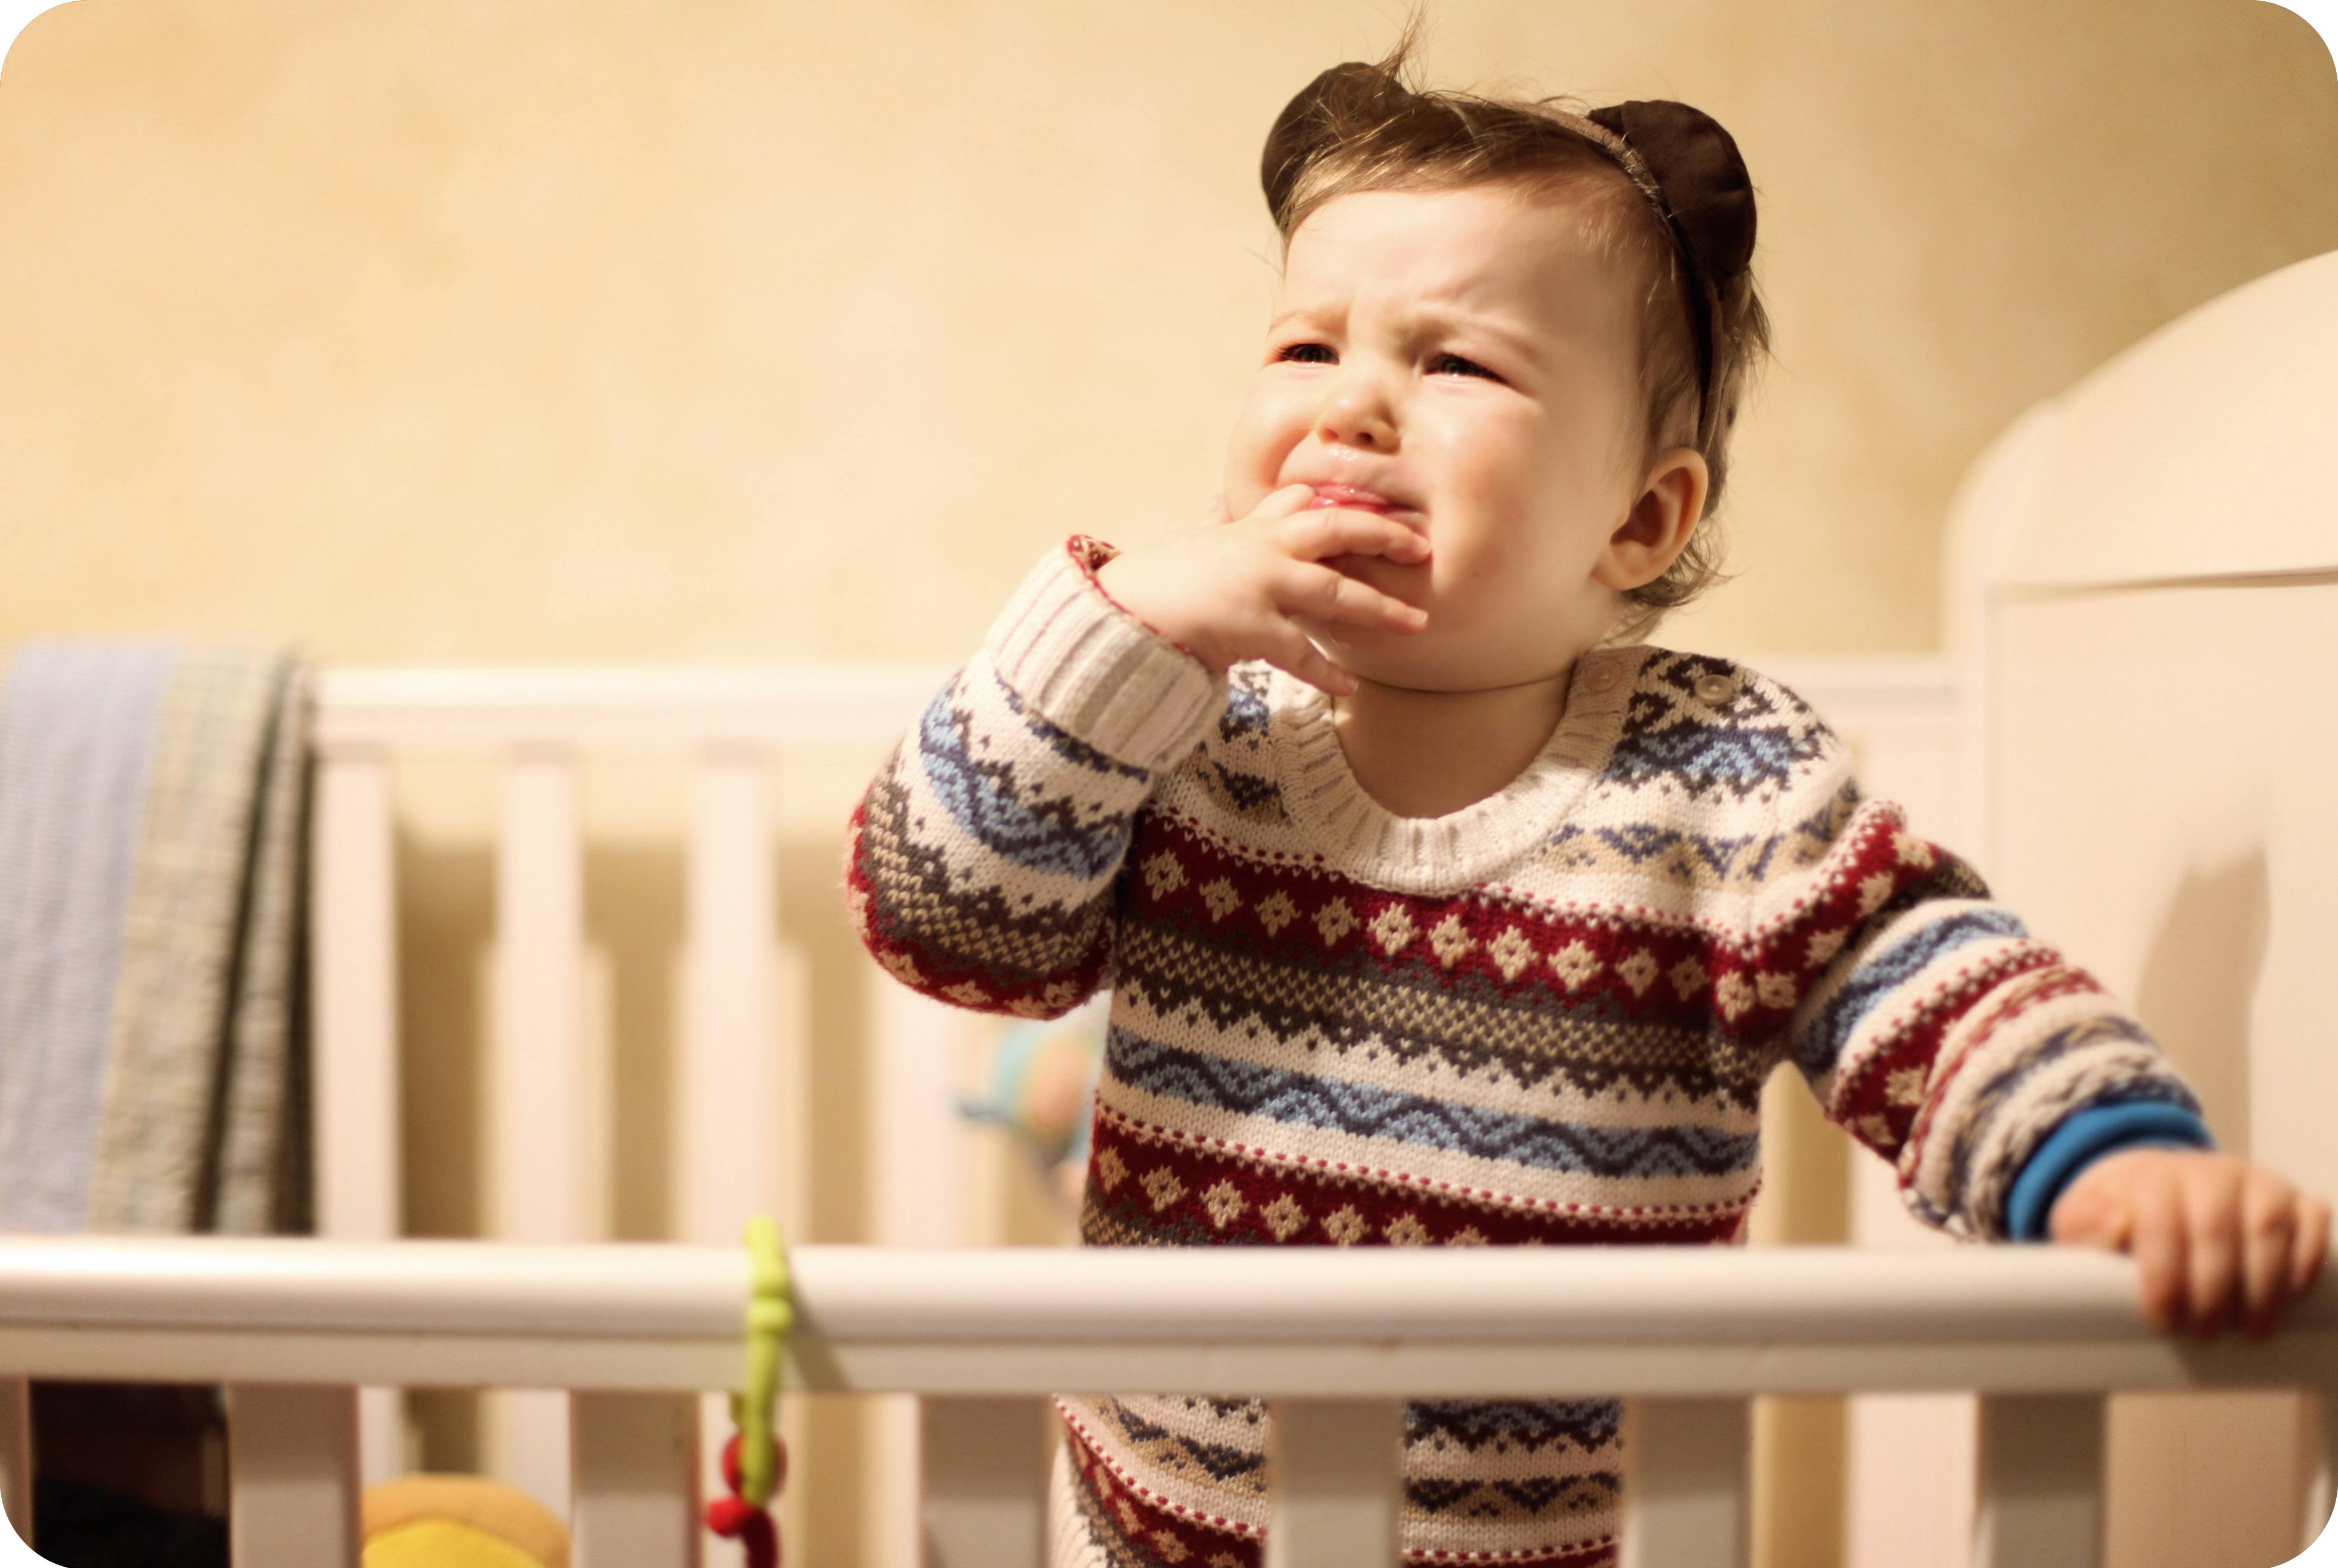 Signs of Teething and 4 Ways to Treat It